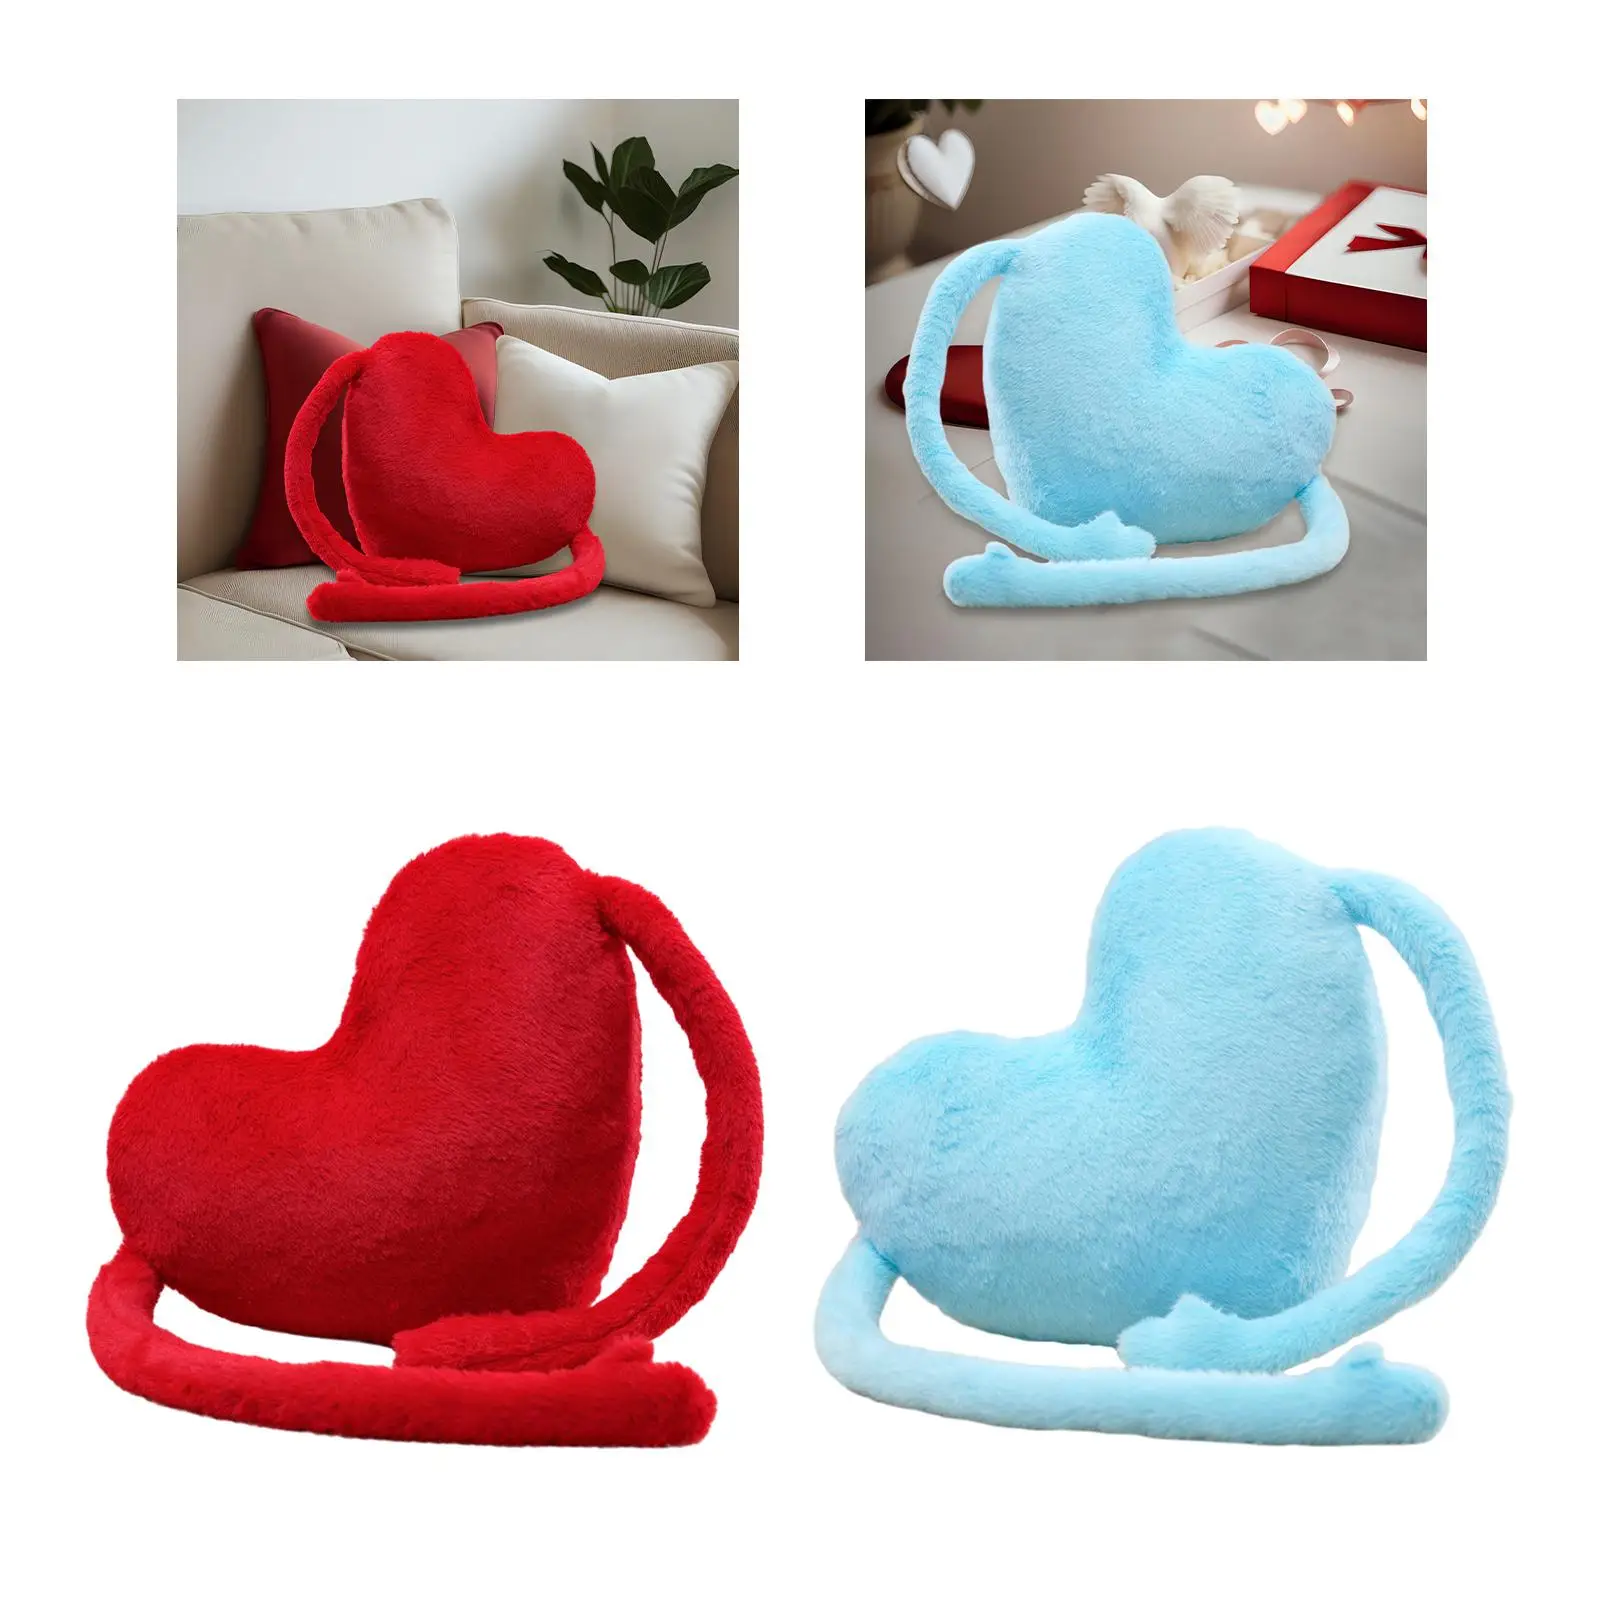 Heart Shaped Pillow Soft Plush Romantic Throw Pillow for Home Kitchen Party